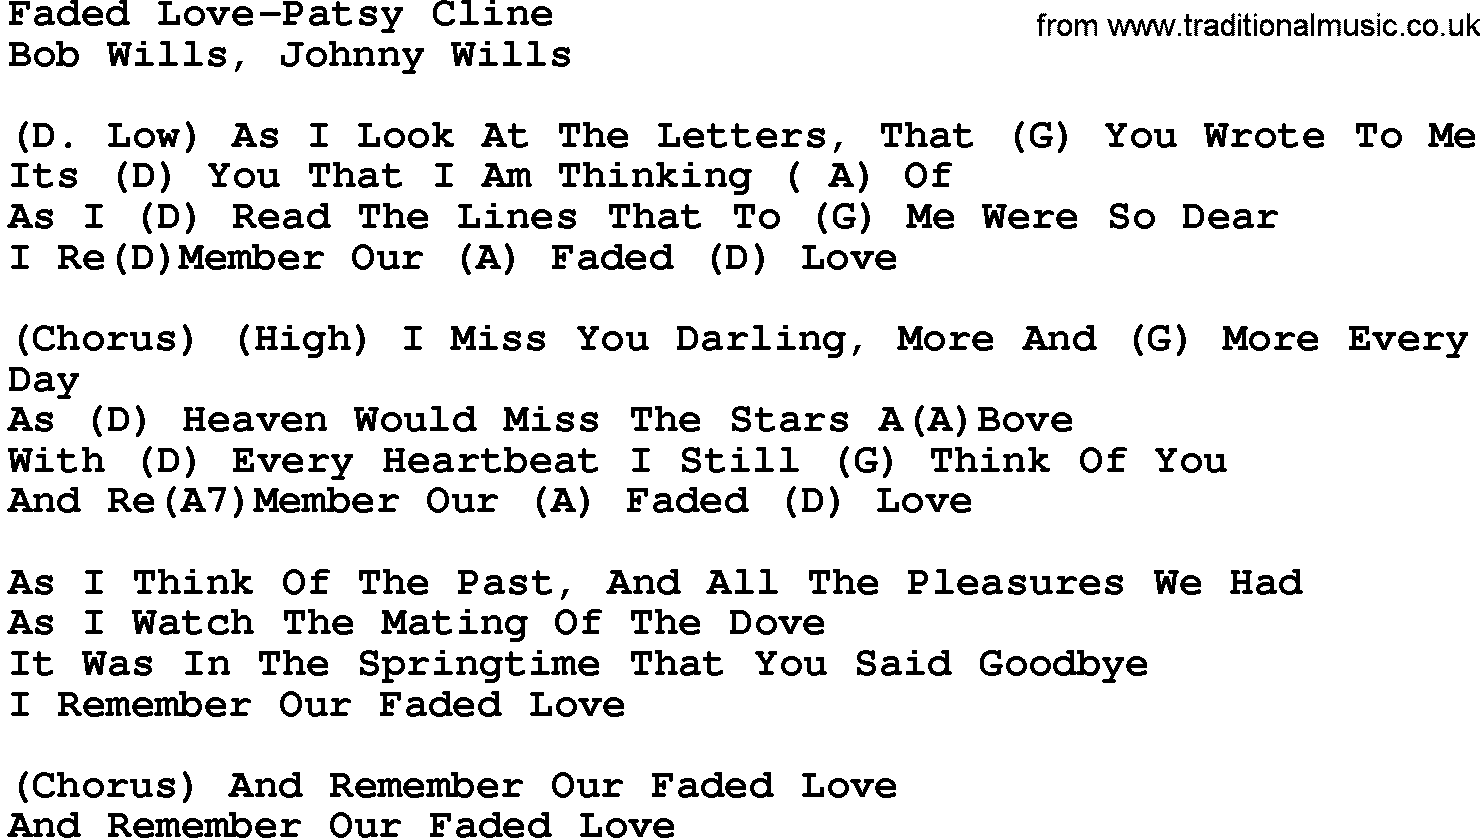 Country music song: Faded Love-Patsy Cline lyrics and chords